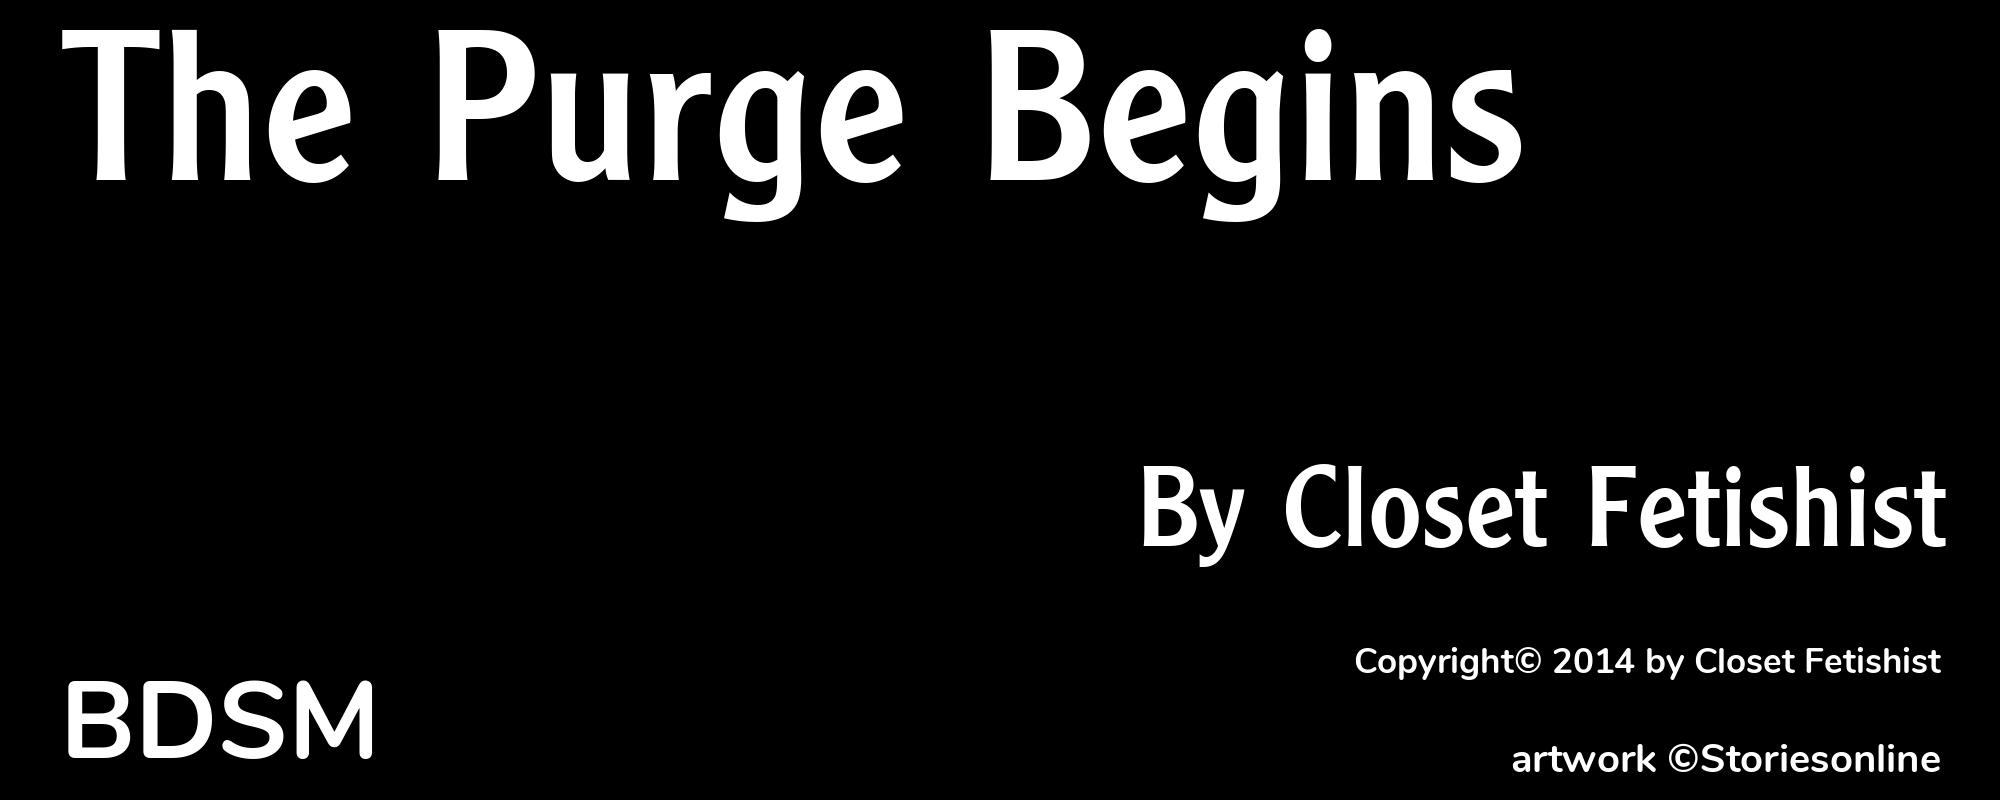 The Purge Begins - Cover